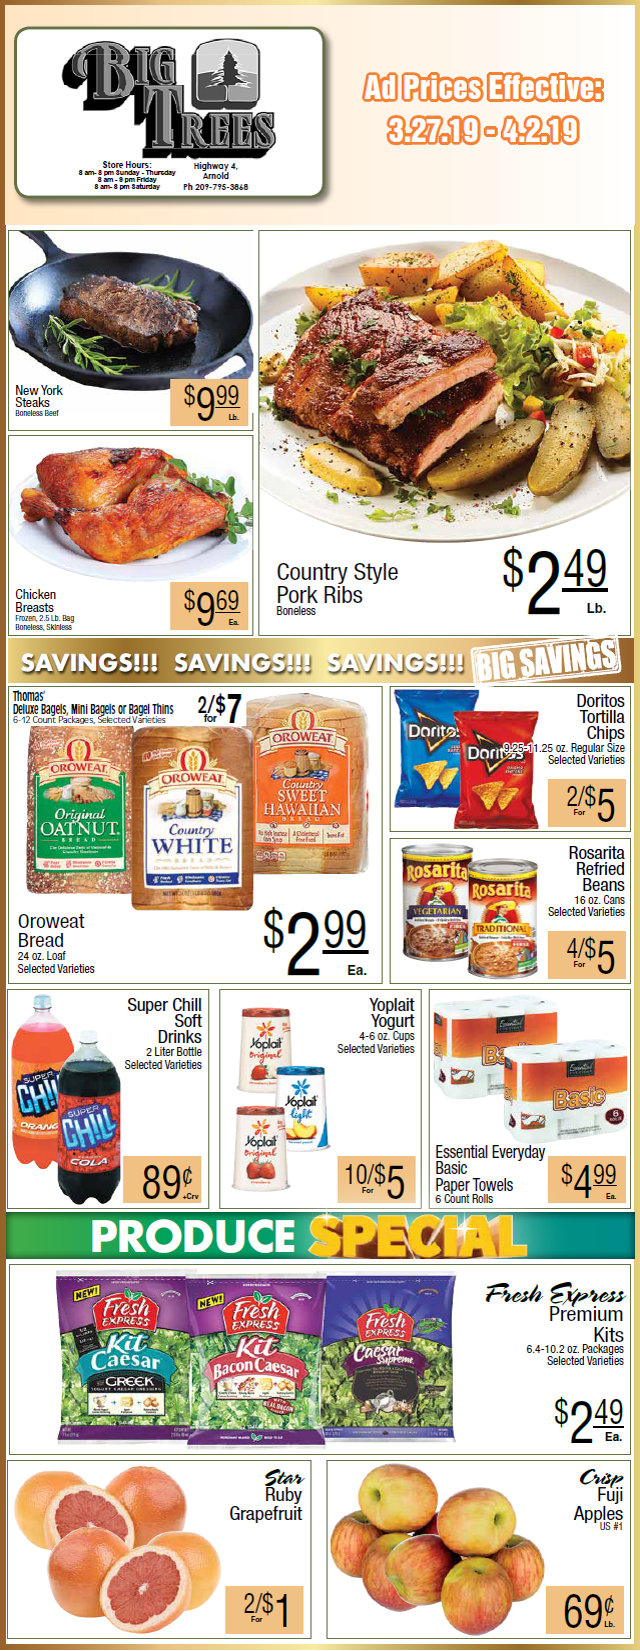 Big Trees Market Weekly Ad & Grocery Specials Through April 2nd